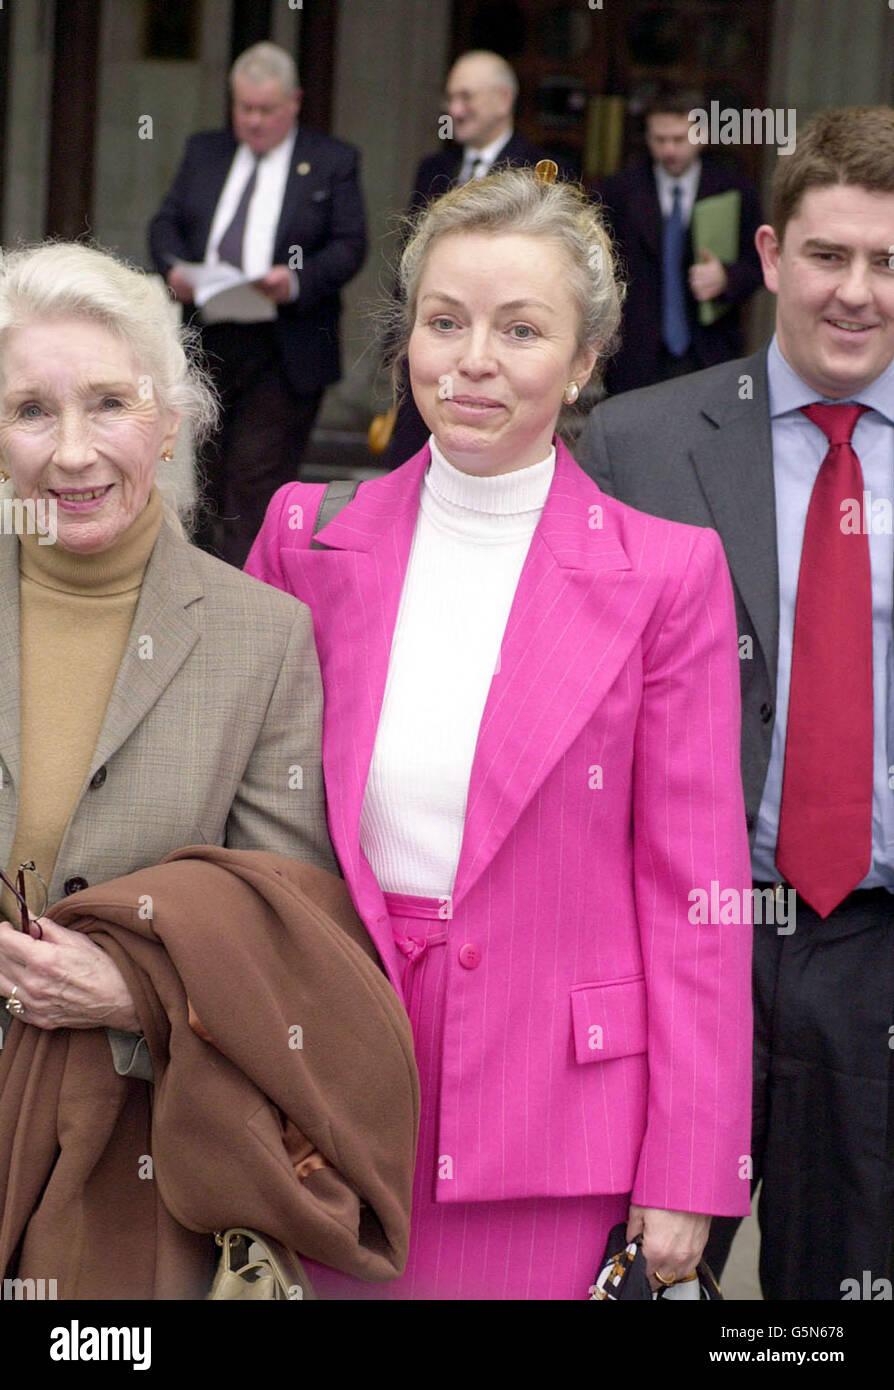 Canadian national Glory Anne Clibbery (right) celebrates with her mother Peggy Clibbery outside the High Court in London, following her victory against Singapore-born and Hong Kong-based racehorse owner and trainer Ivan Allan. * Mr Allan had attempted to win an injunction against his former mistress of 15 years, Miss Clibbery, which would have effectively prevented her from revealing details of their relationship, but the High Court ruling granted by Mr Justice Munby went in her favour. Stock Photo